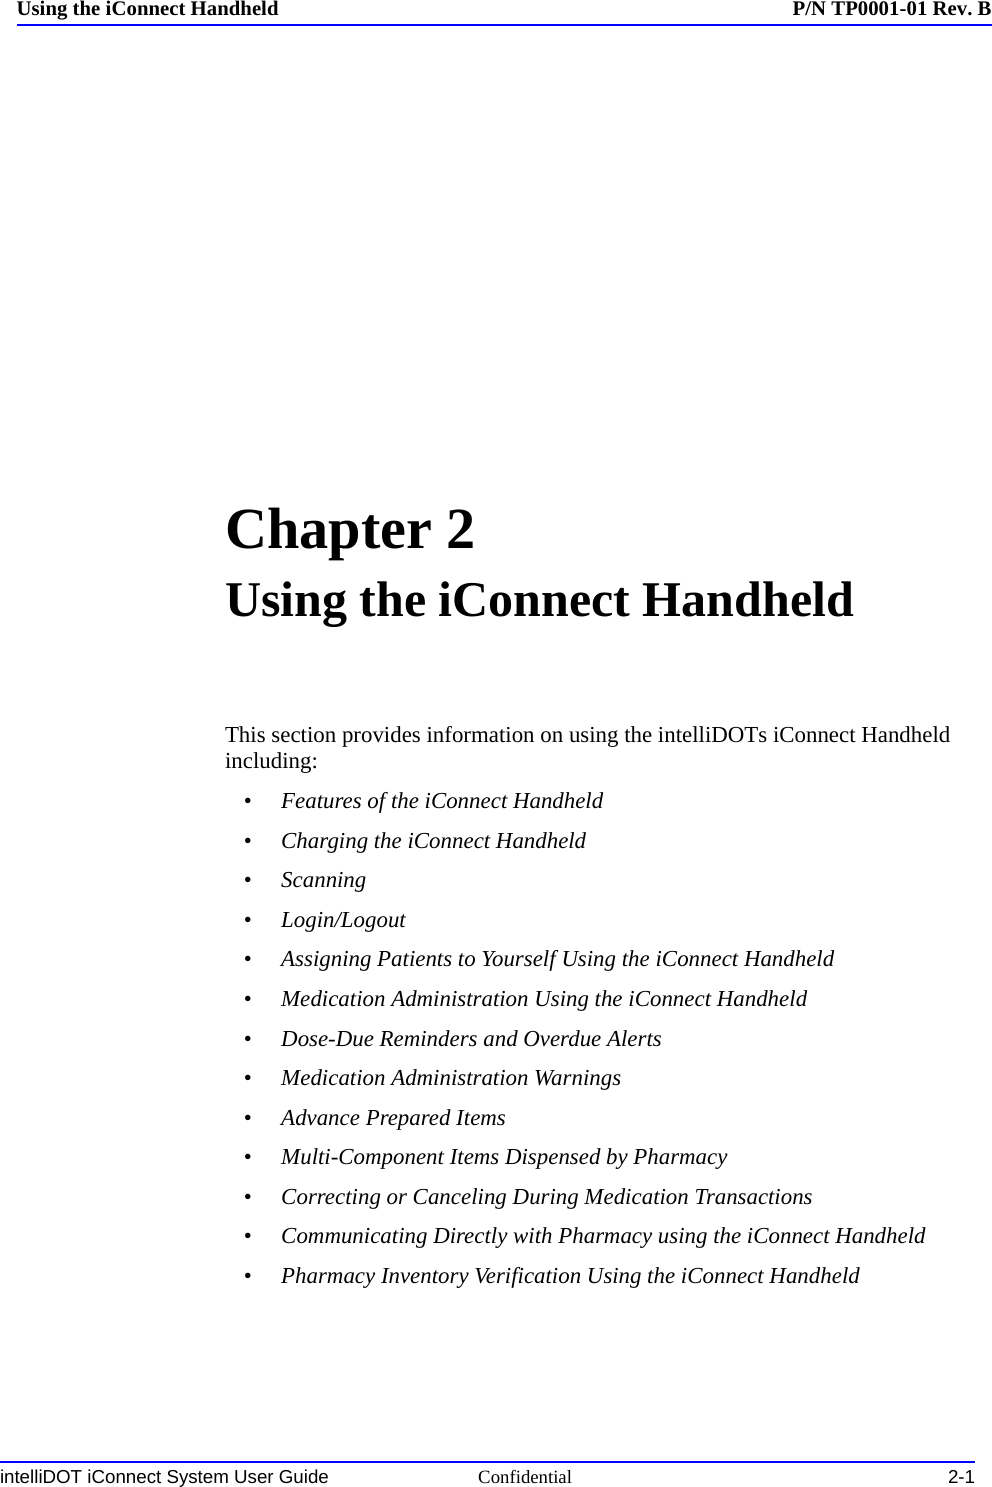 intelliDOT iConnect System User Guide Confidential 2-1Using the iConnect Handheld P/N TP0001-01 Rev. BChapter 2Using the iConnect HandheldThis section provides information on using the intelliDOTs iConnect Handheld including:•Features of the iConnect Handheld•Charging the iConnect Handheld•Scanning•Login/Logout•Assigning Patients to Yourself Using the iConnect Handheld•Medication Administration Using the iConnect Handheld•Dose-Due Reminders and Overdue Alerts•Medication Administration Warnings•Advance Prepared Items•Multi-Component Items Dispensed by Pharmacy•Correcting or Canceling During Medication Transactions•Communicating Directly with Pharmacy using the iConnect Handheld•Pharmacy Inventory Verification Using the iConnect Handheld